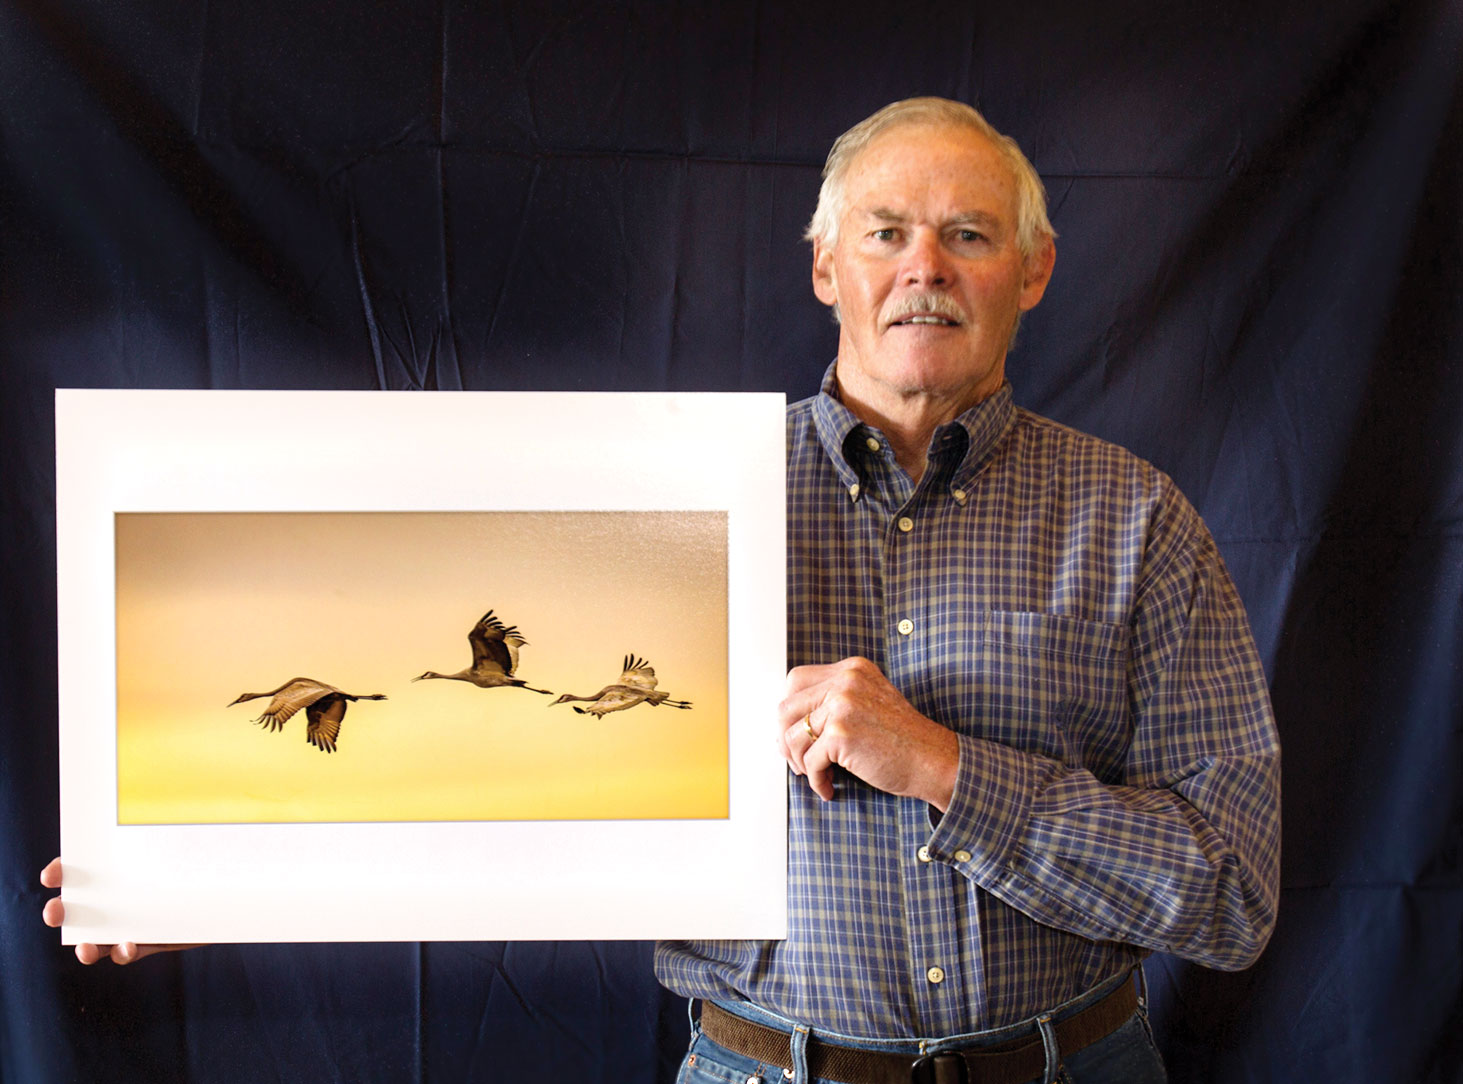 Bob Shea’s photo was selected as the best overall Three Cranes award.